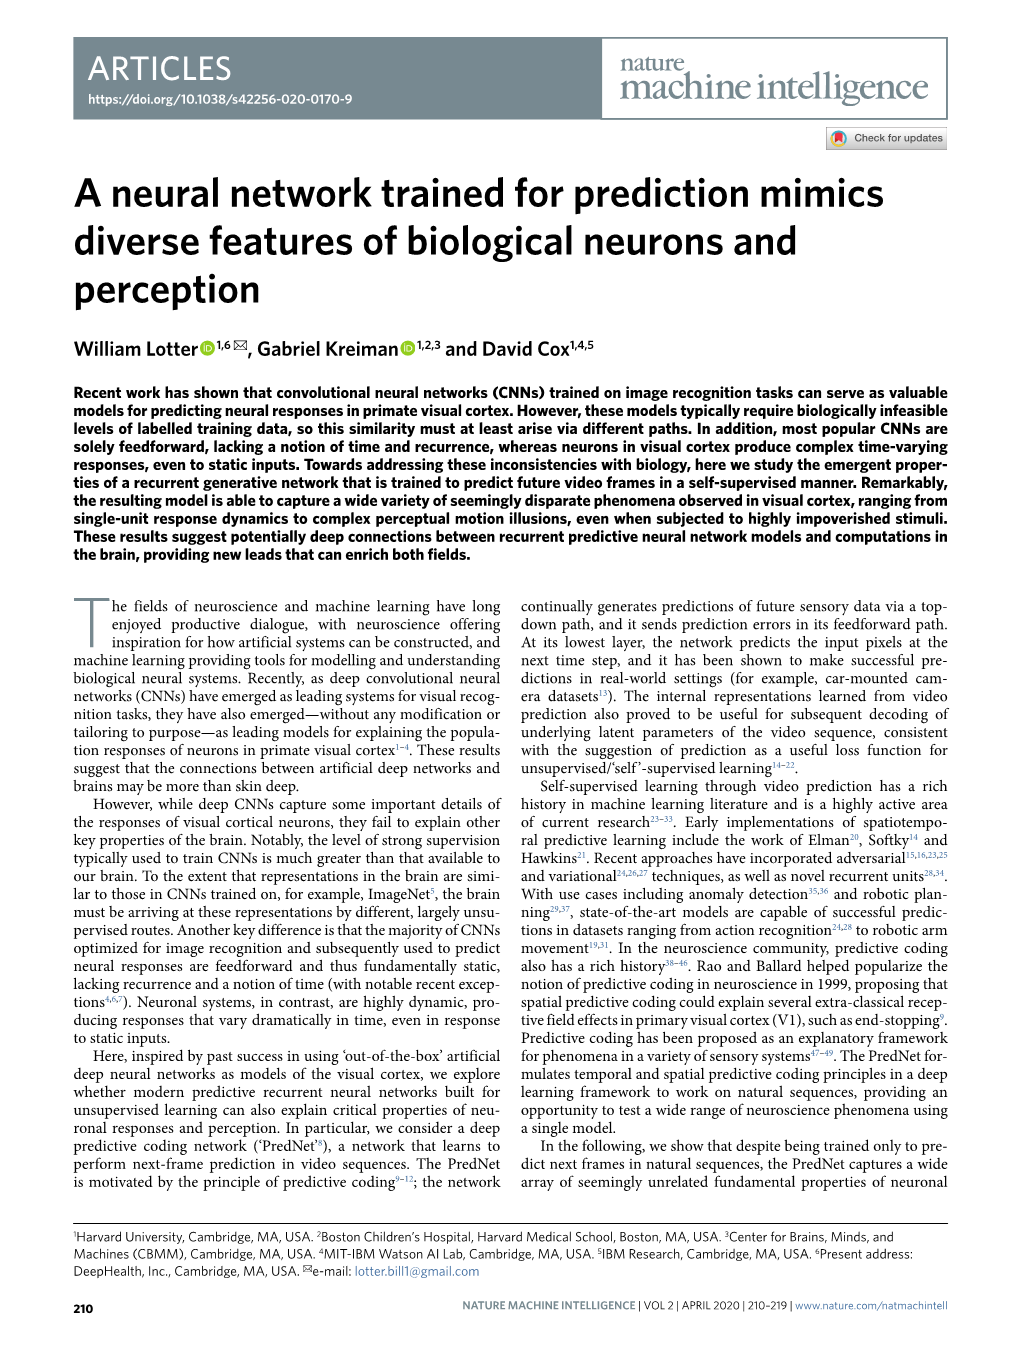 A Neural Network Trained for Prediction Mimics Diverse Features of Biological Neurons and Perception